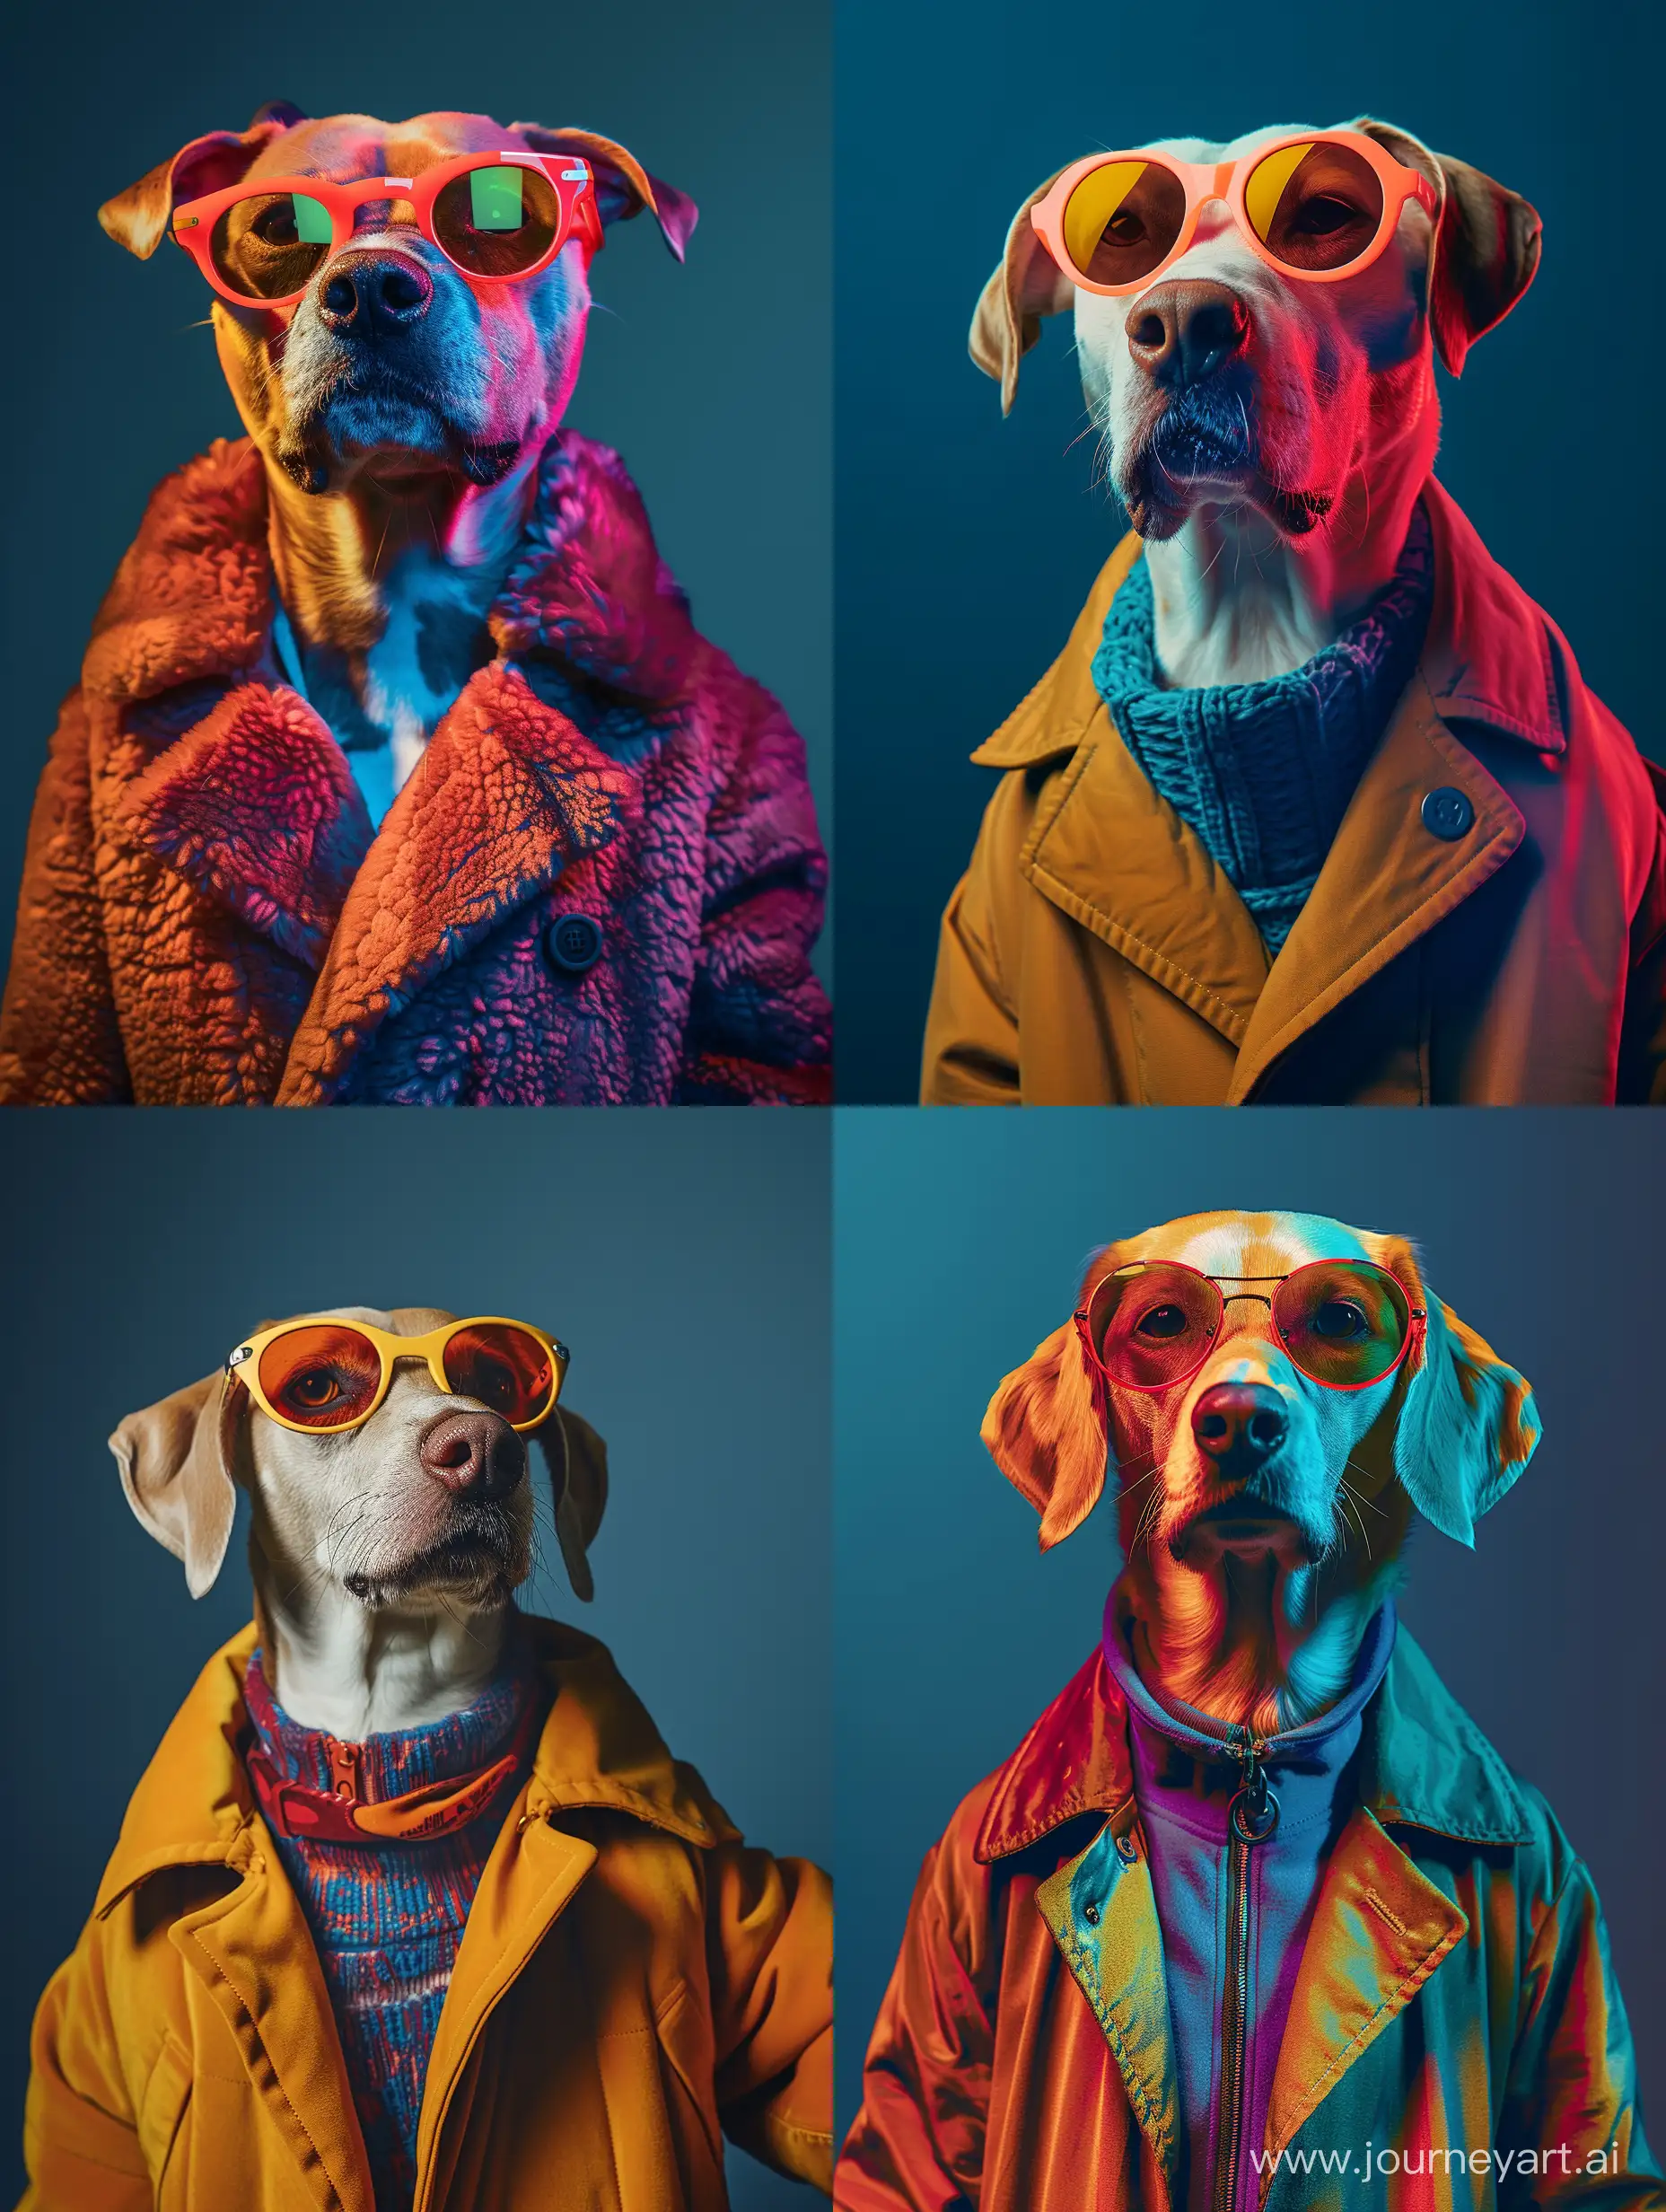 Dog-in-1960s-MidCentury-SpaceAge-Fashion-against-Deep-Blue-Backdrop